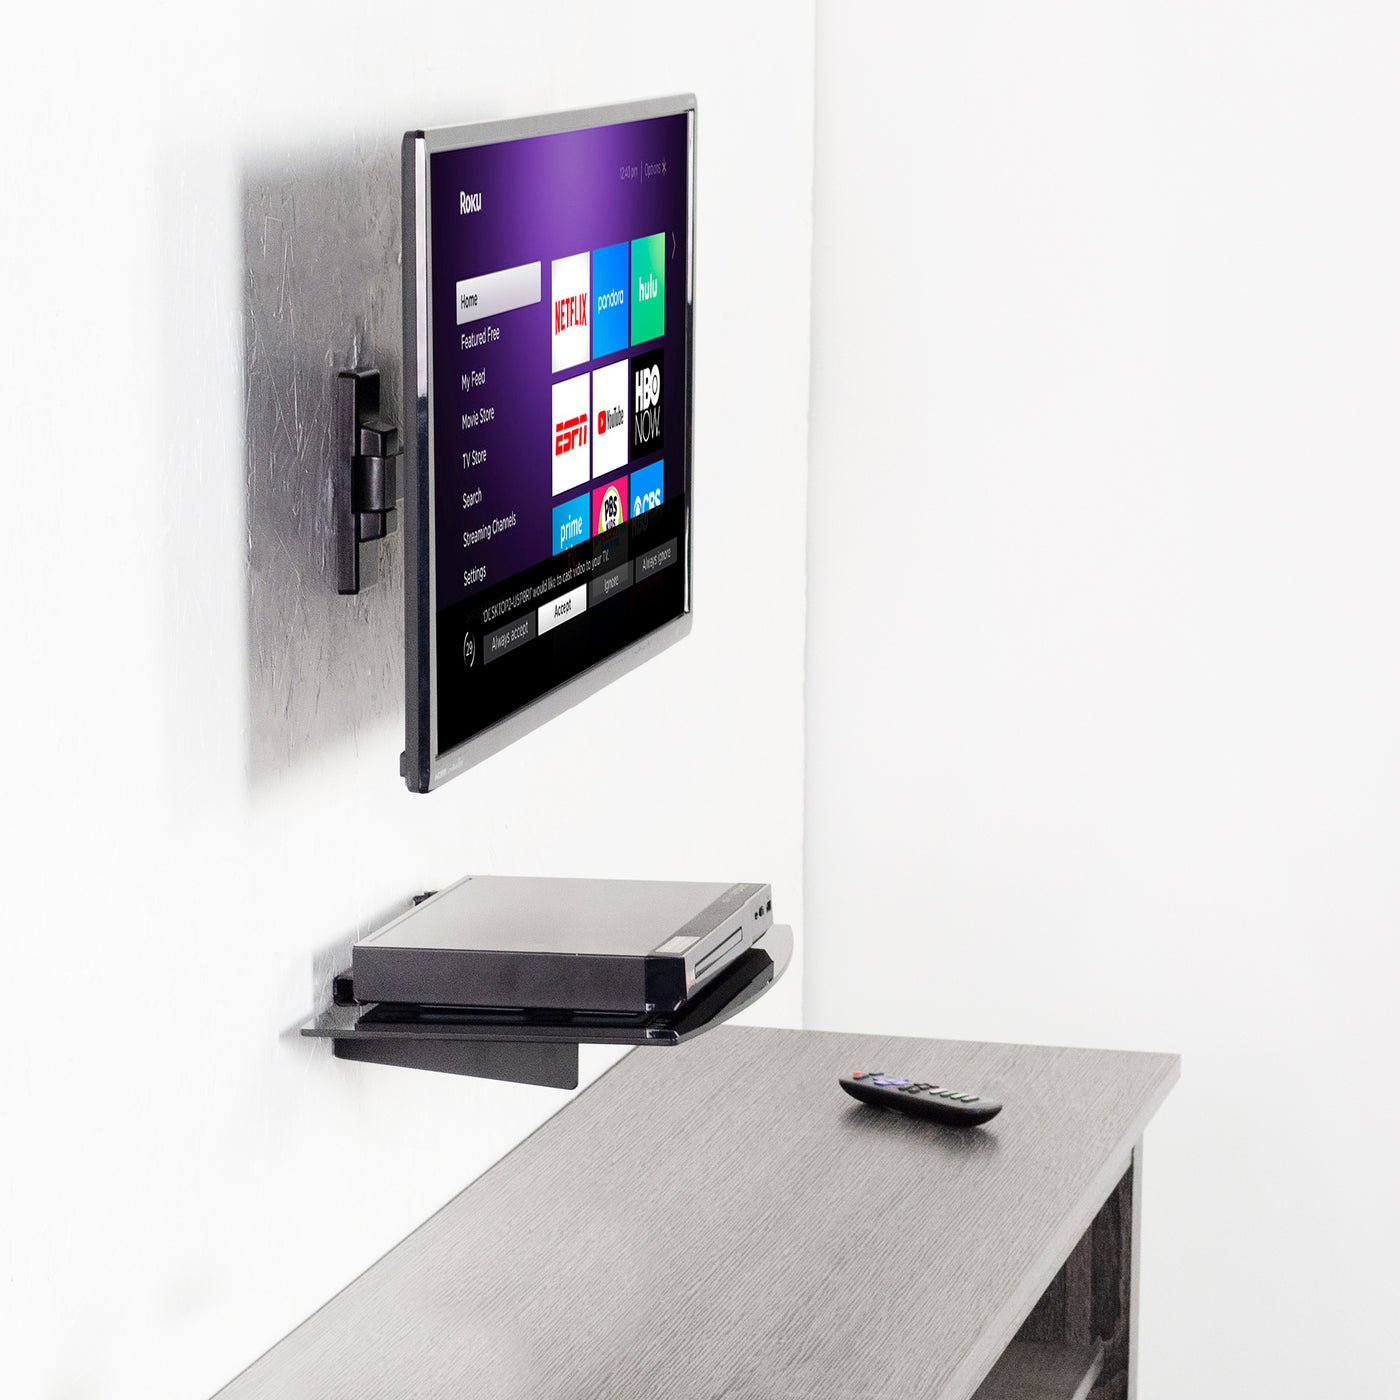 Roku TV and remote with a floating shelf.